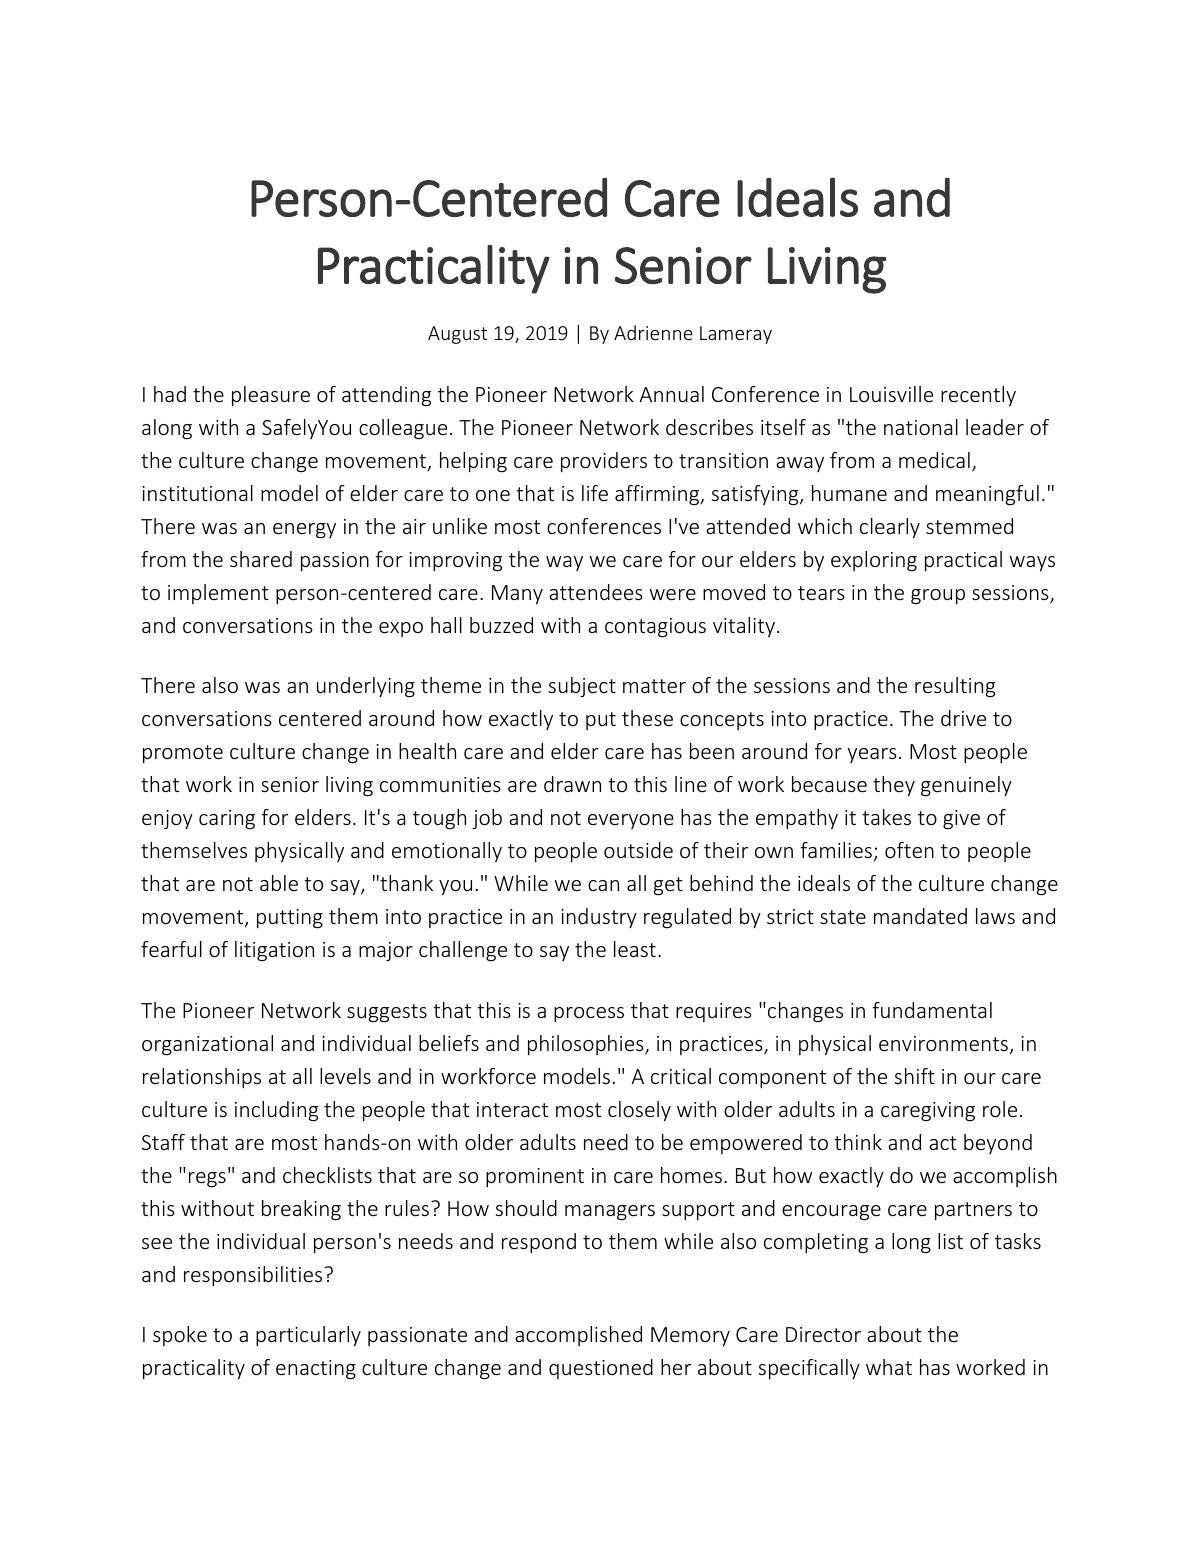 Person-Centered Care Ideals and Practicality in Senior Living